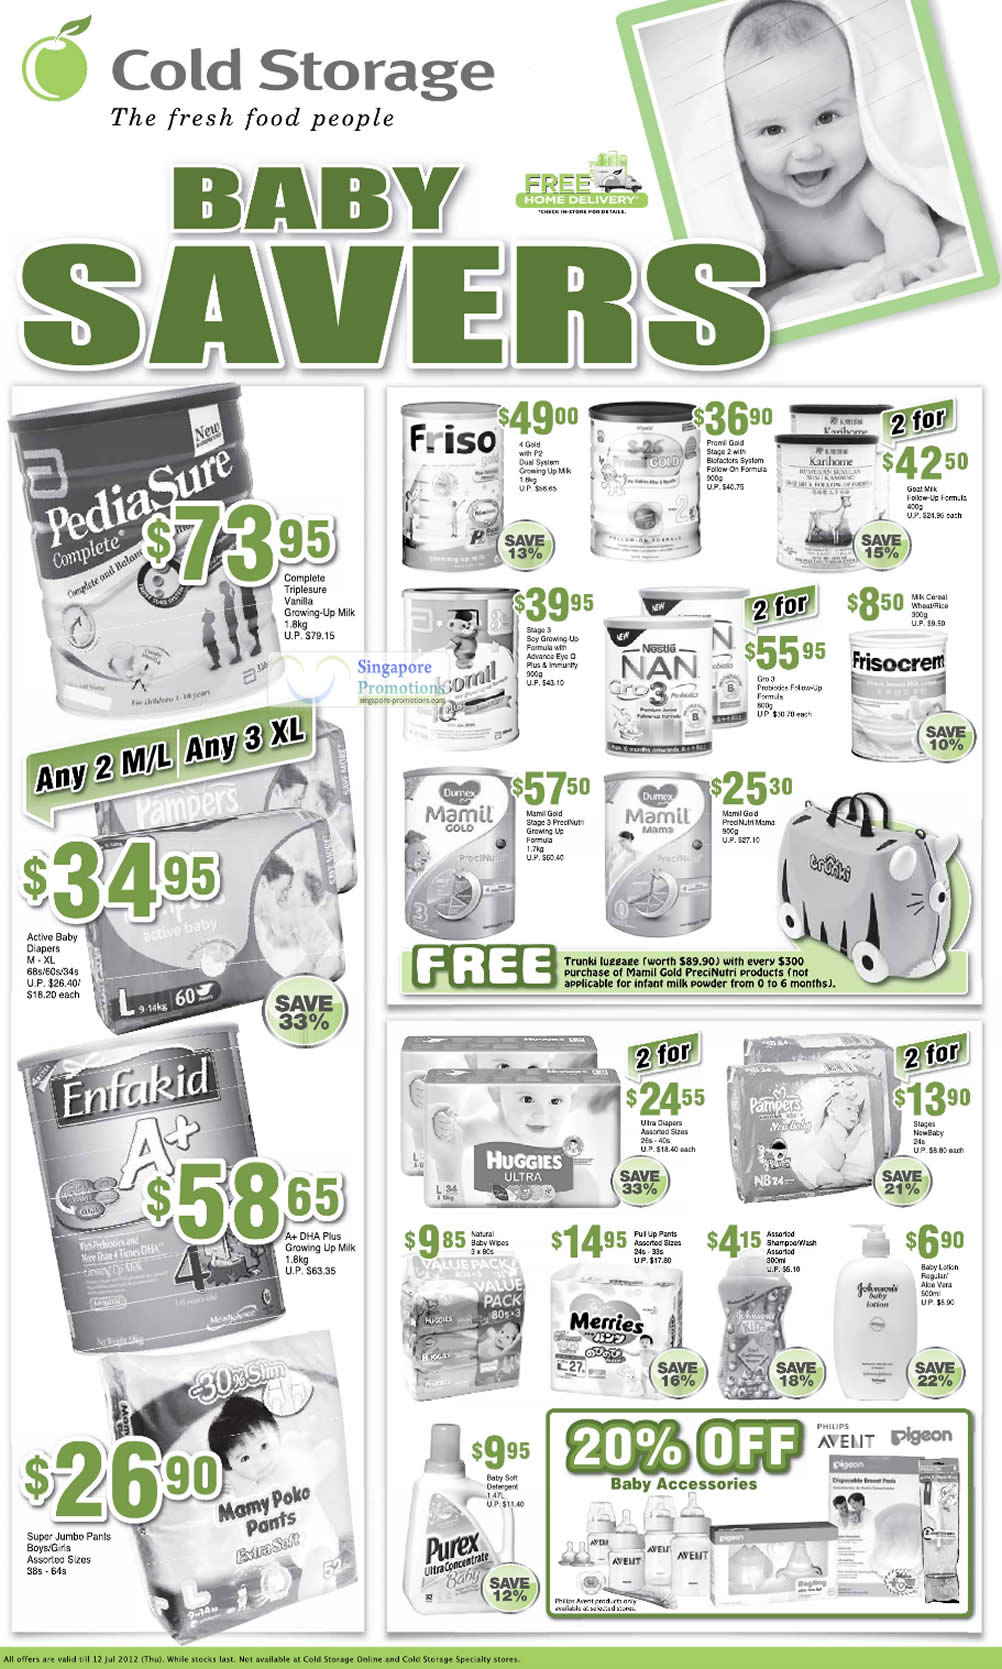 Featured image for Cold Storage Wines & Baby Promotion Offers 6 - 12 Jul 2012